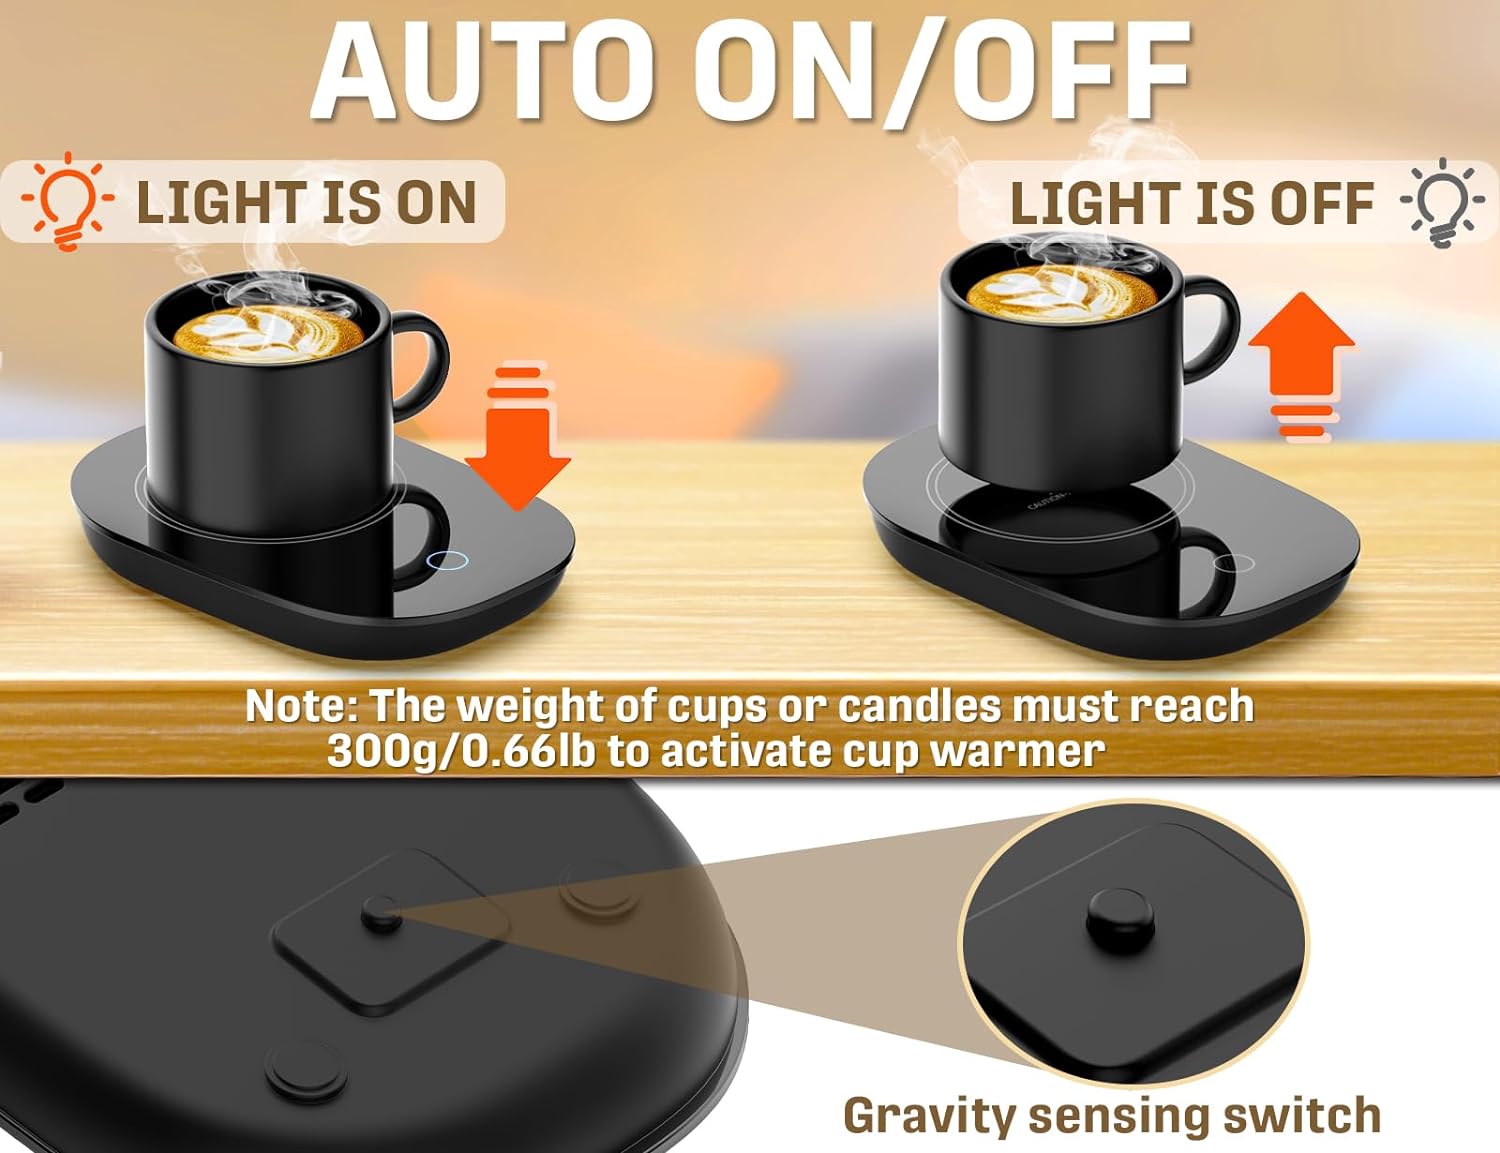 Coffee Mug Warmer Gravity Induction - Coffee Warmer for Desk Auto Shut Off, Cup Warmer for Coffee, Electric Beverage Tea Water Milk Warmer for All Cups and Mugs, Heating Plate Candle Warmer